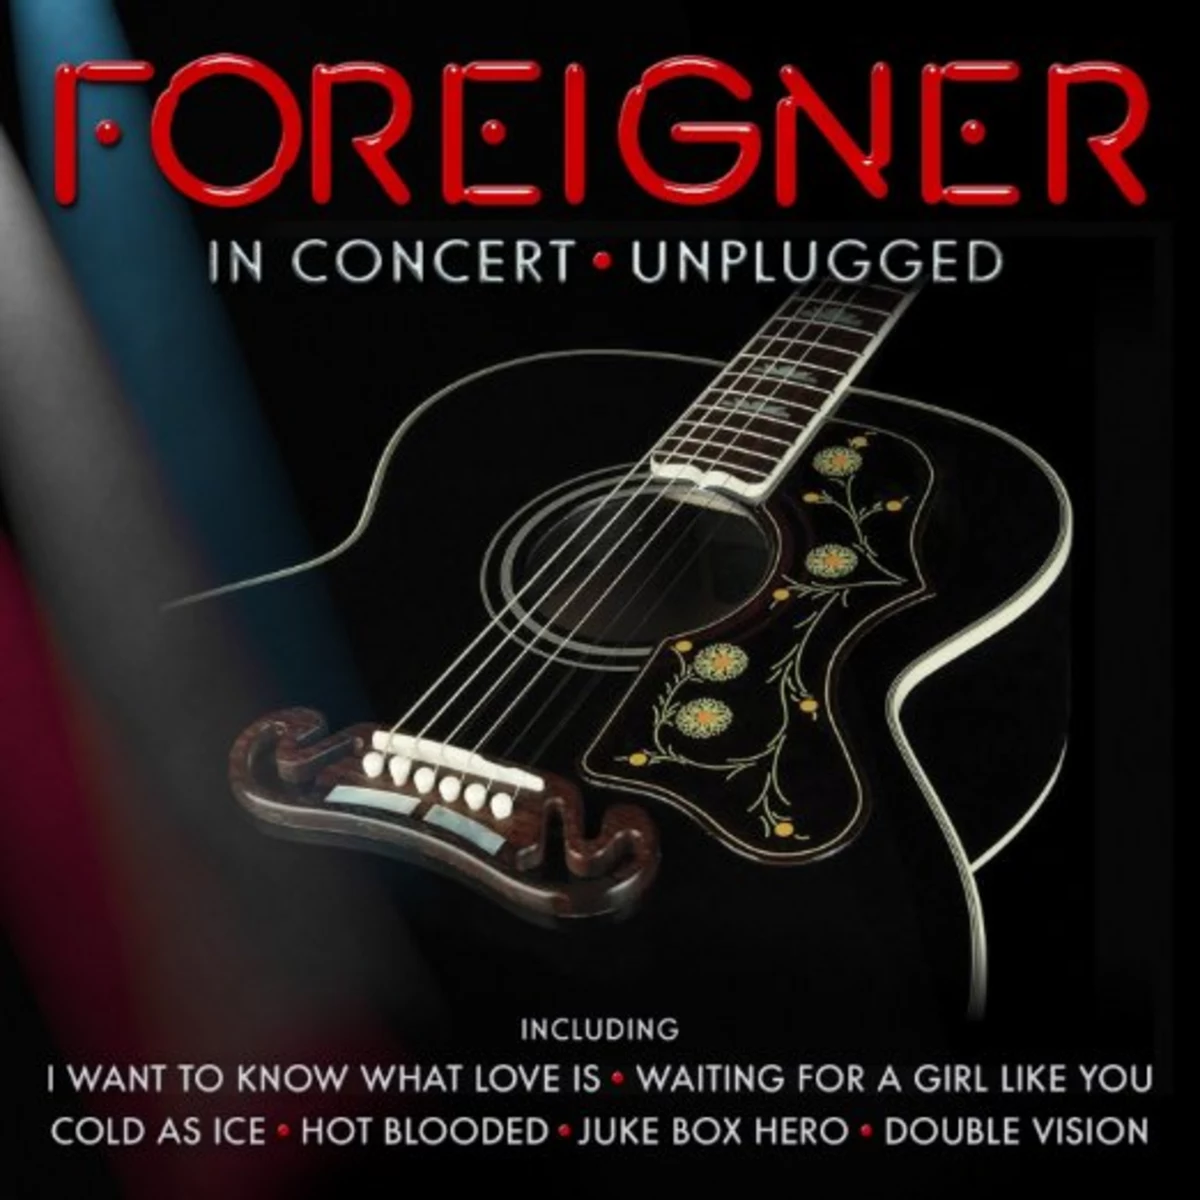 New Foreigner Live Disc To Be Released Tomorrow